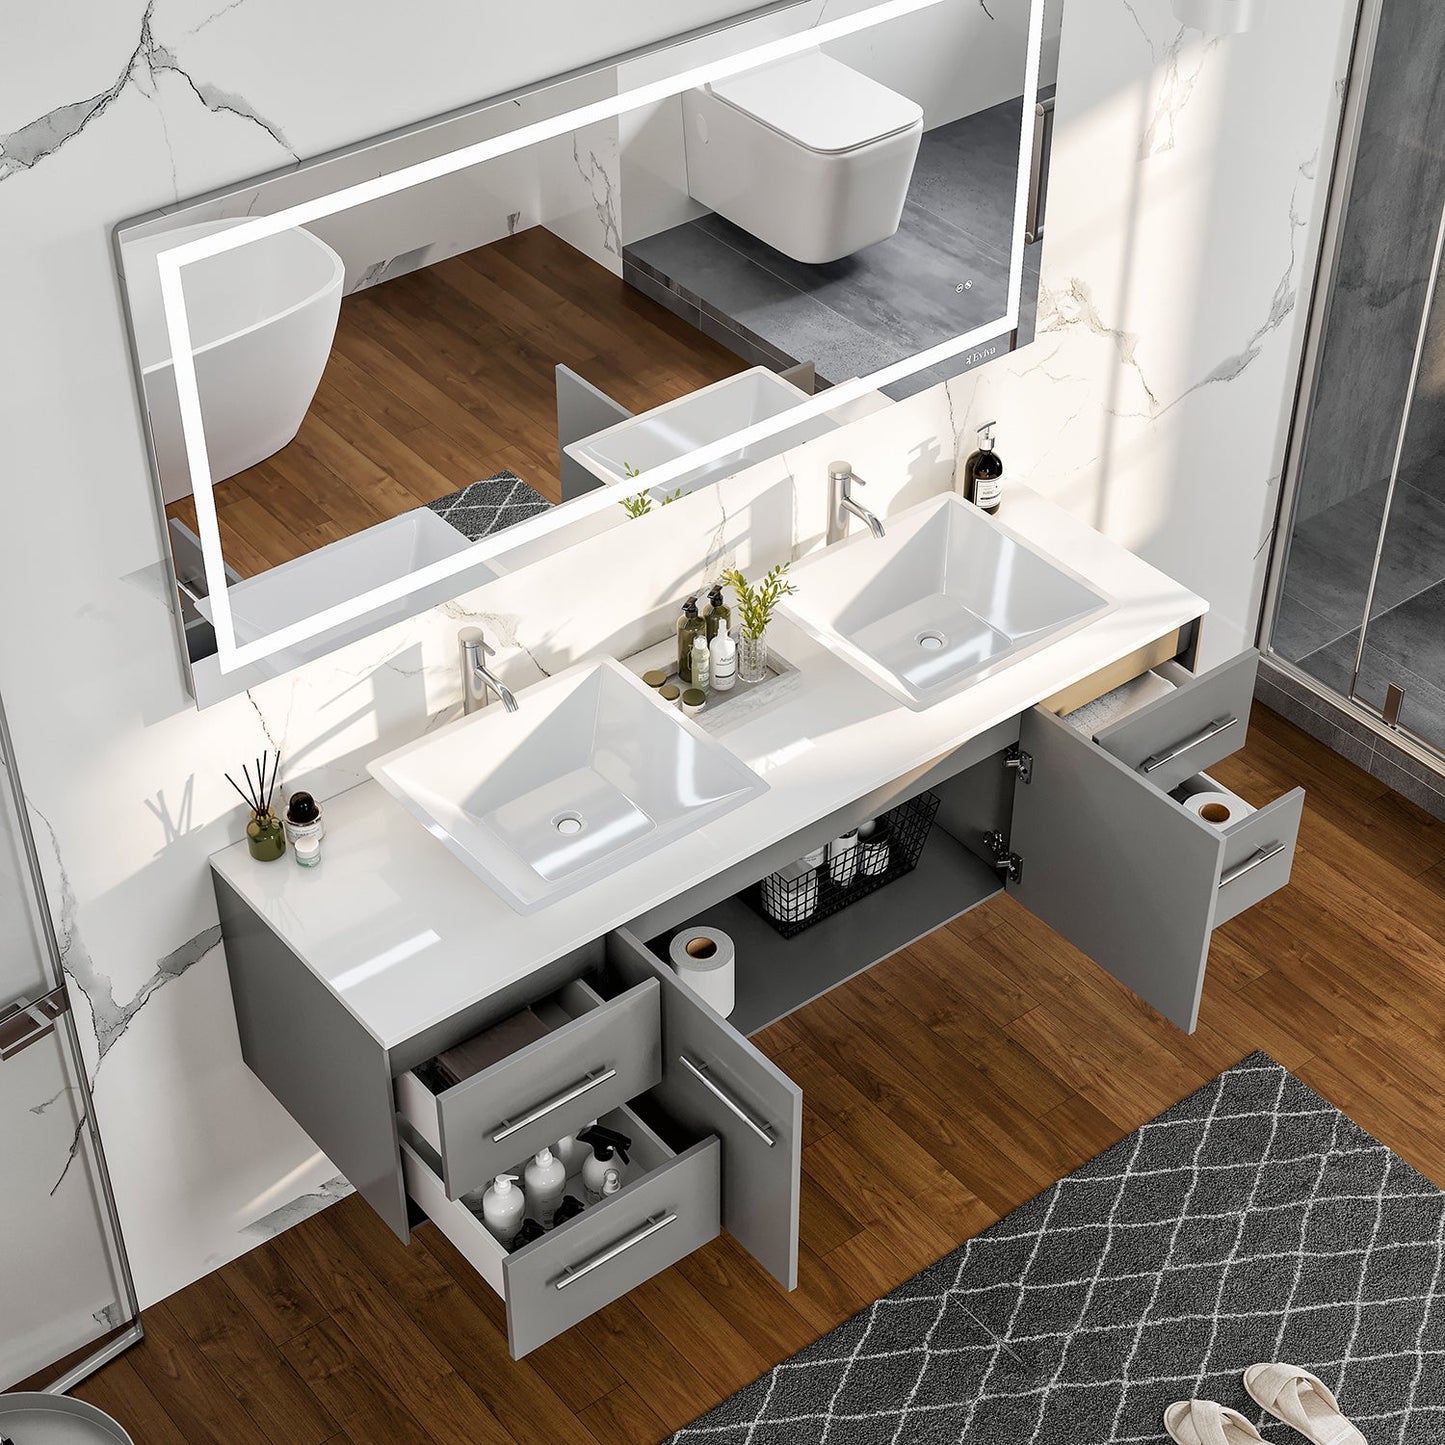 Wave 72"W x 22"D Gray Double Sink Bathroom Vanity with White Quartz Countertop and Vessel Porcelain Sink